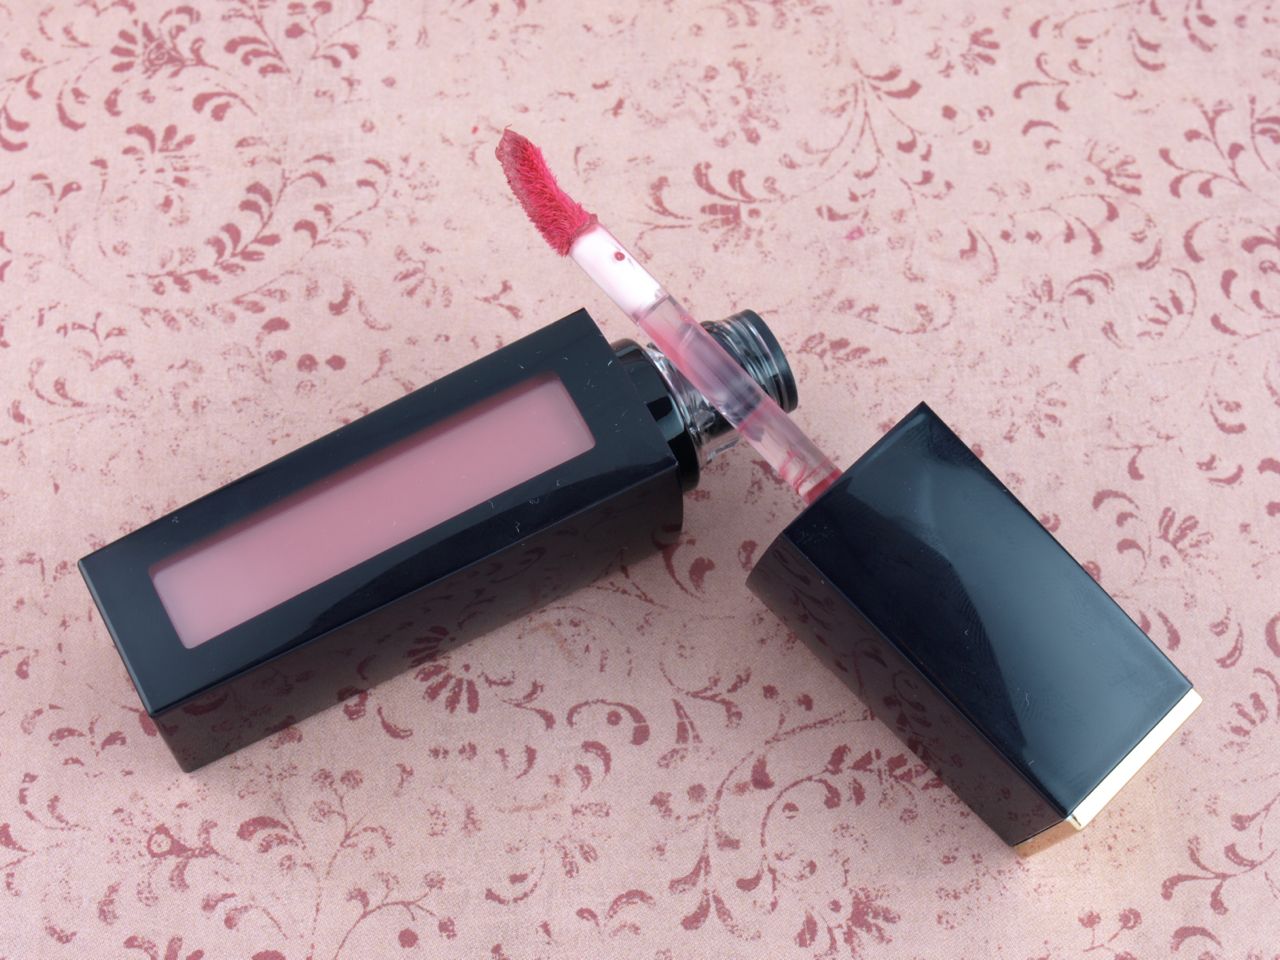 Estee Lauder Pure Color Envy Lip Potion in "Not So Innocent": Review and Swatches